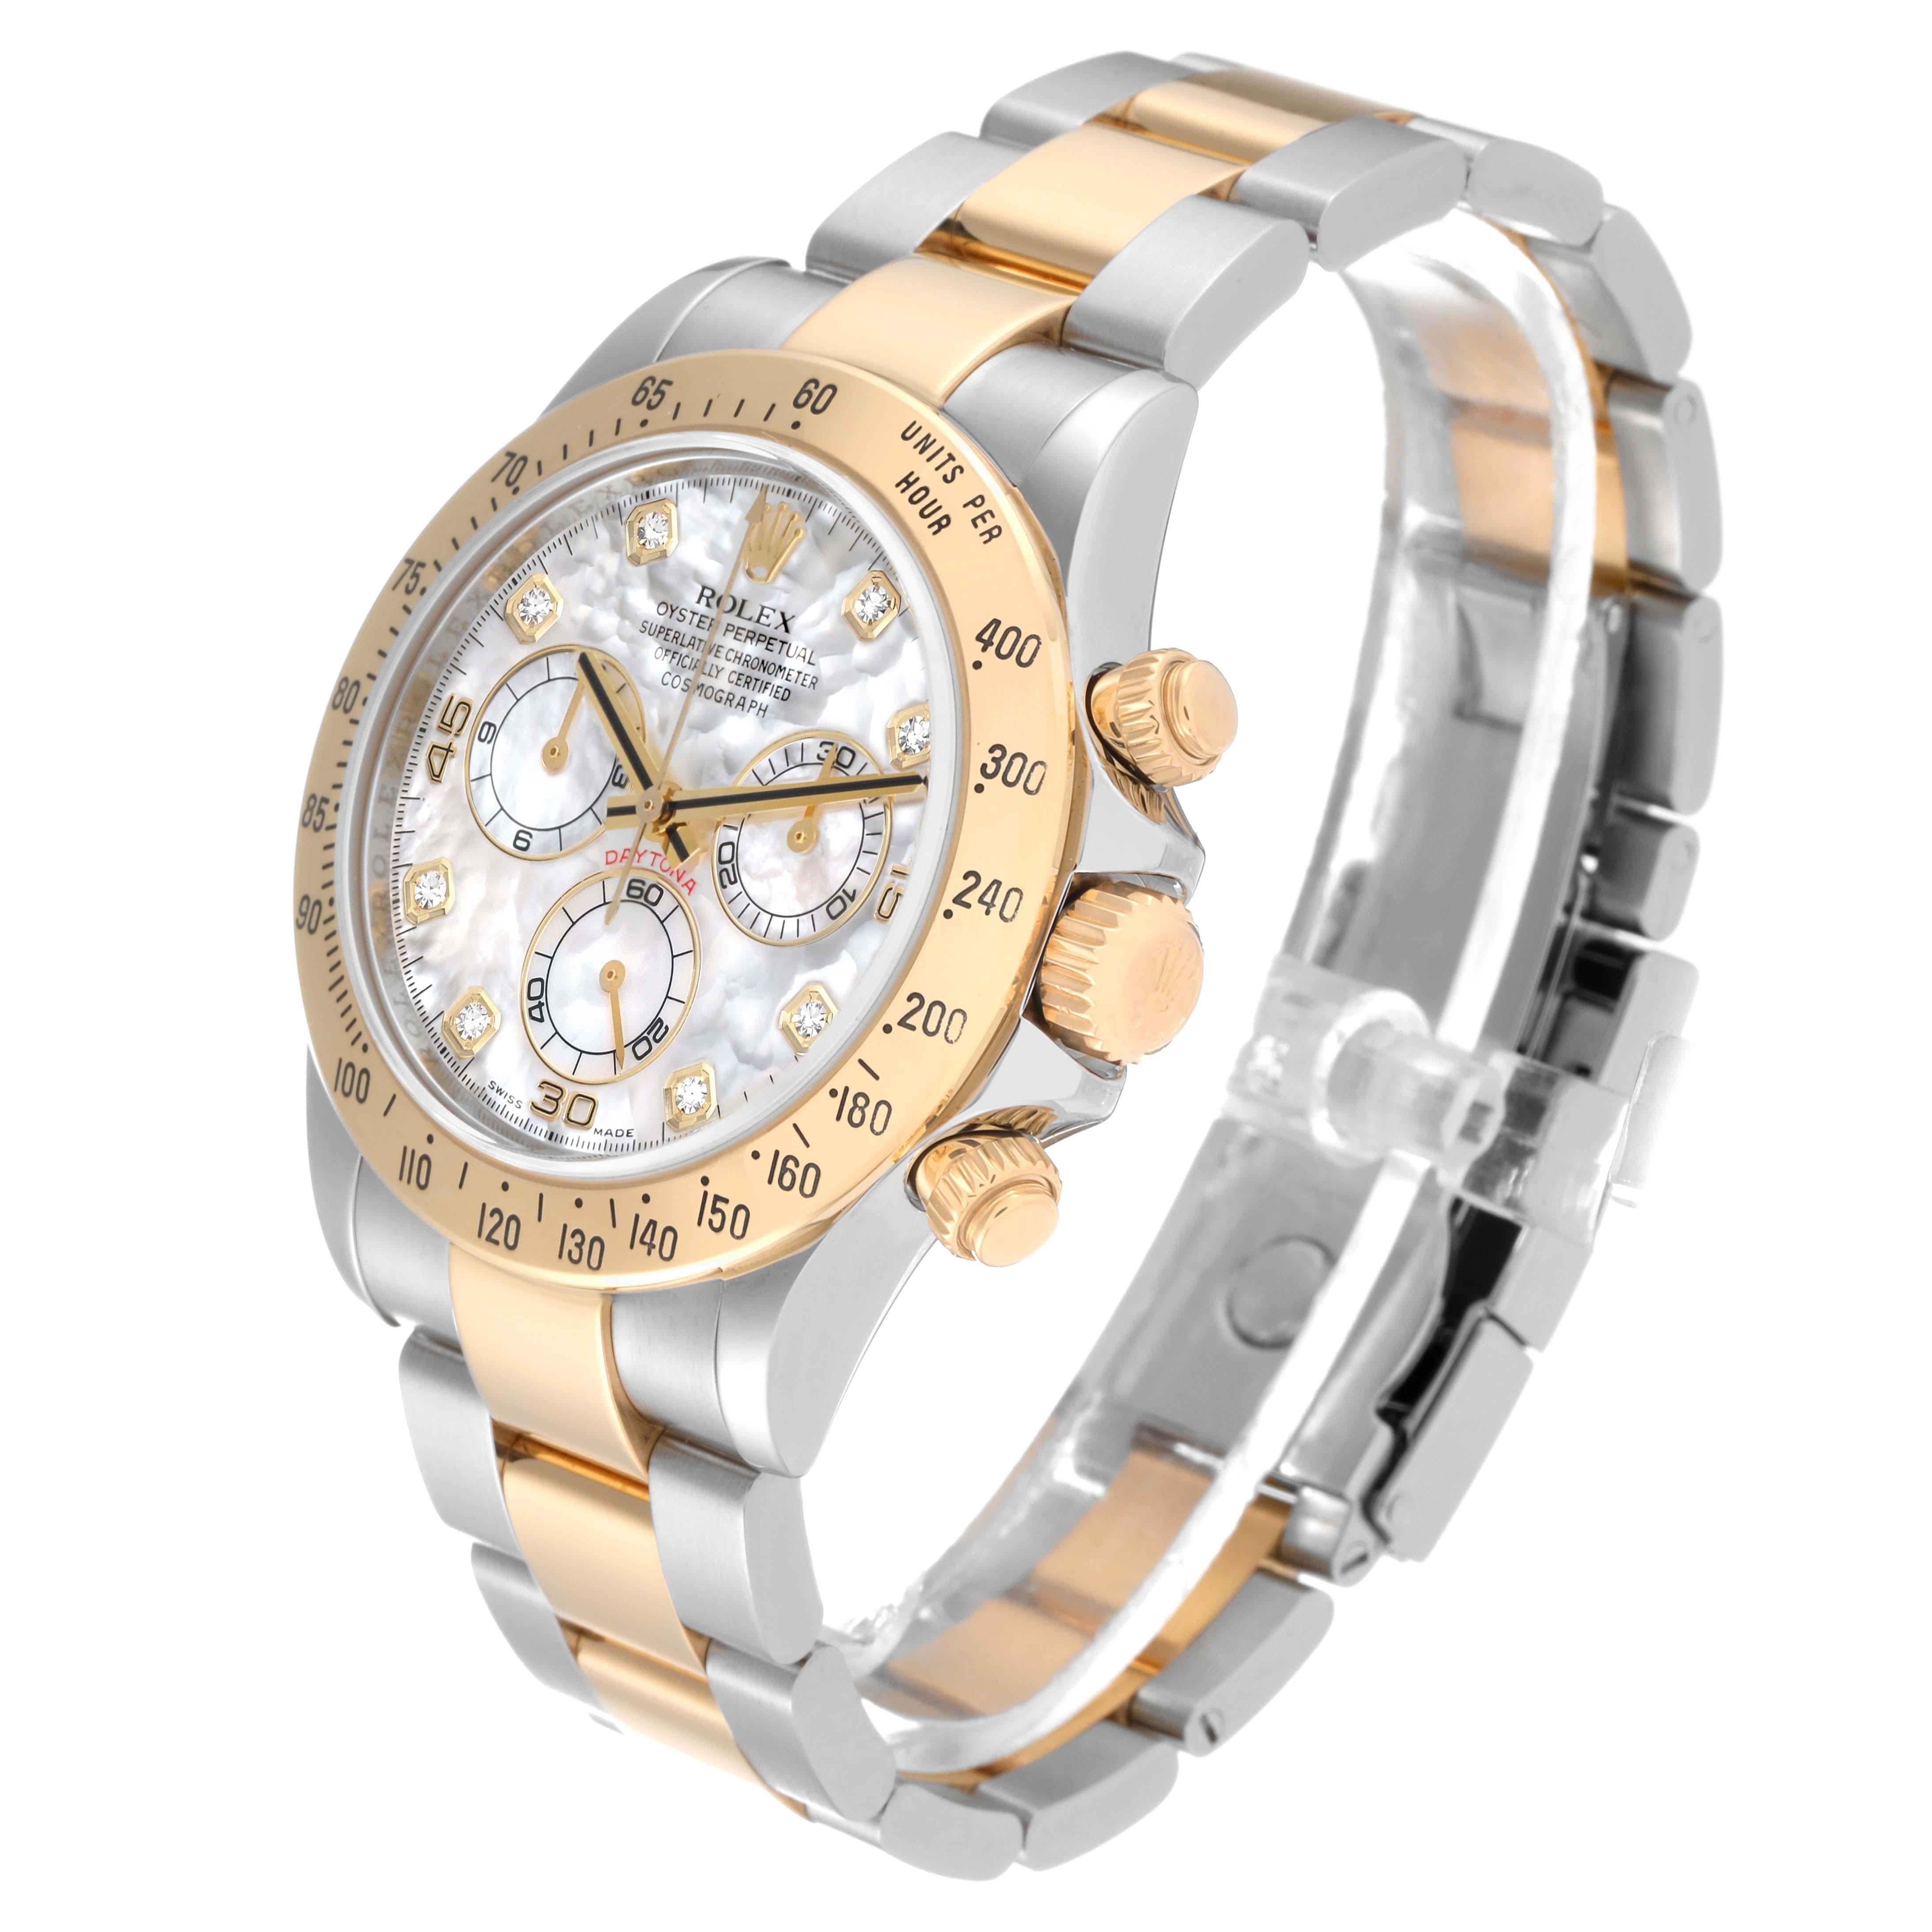 Rolex Daytona Yellow Gold Steel Mother of Pearl Diamond Mens Watch 116523 For Sale 2